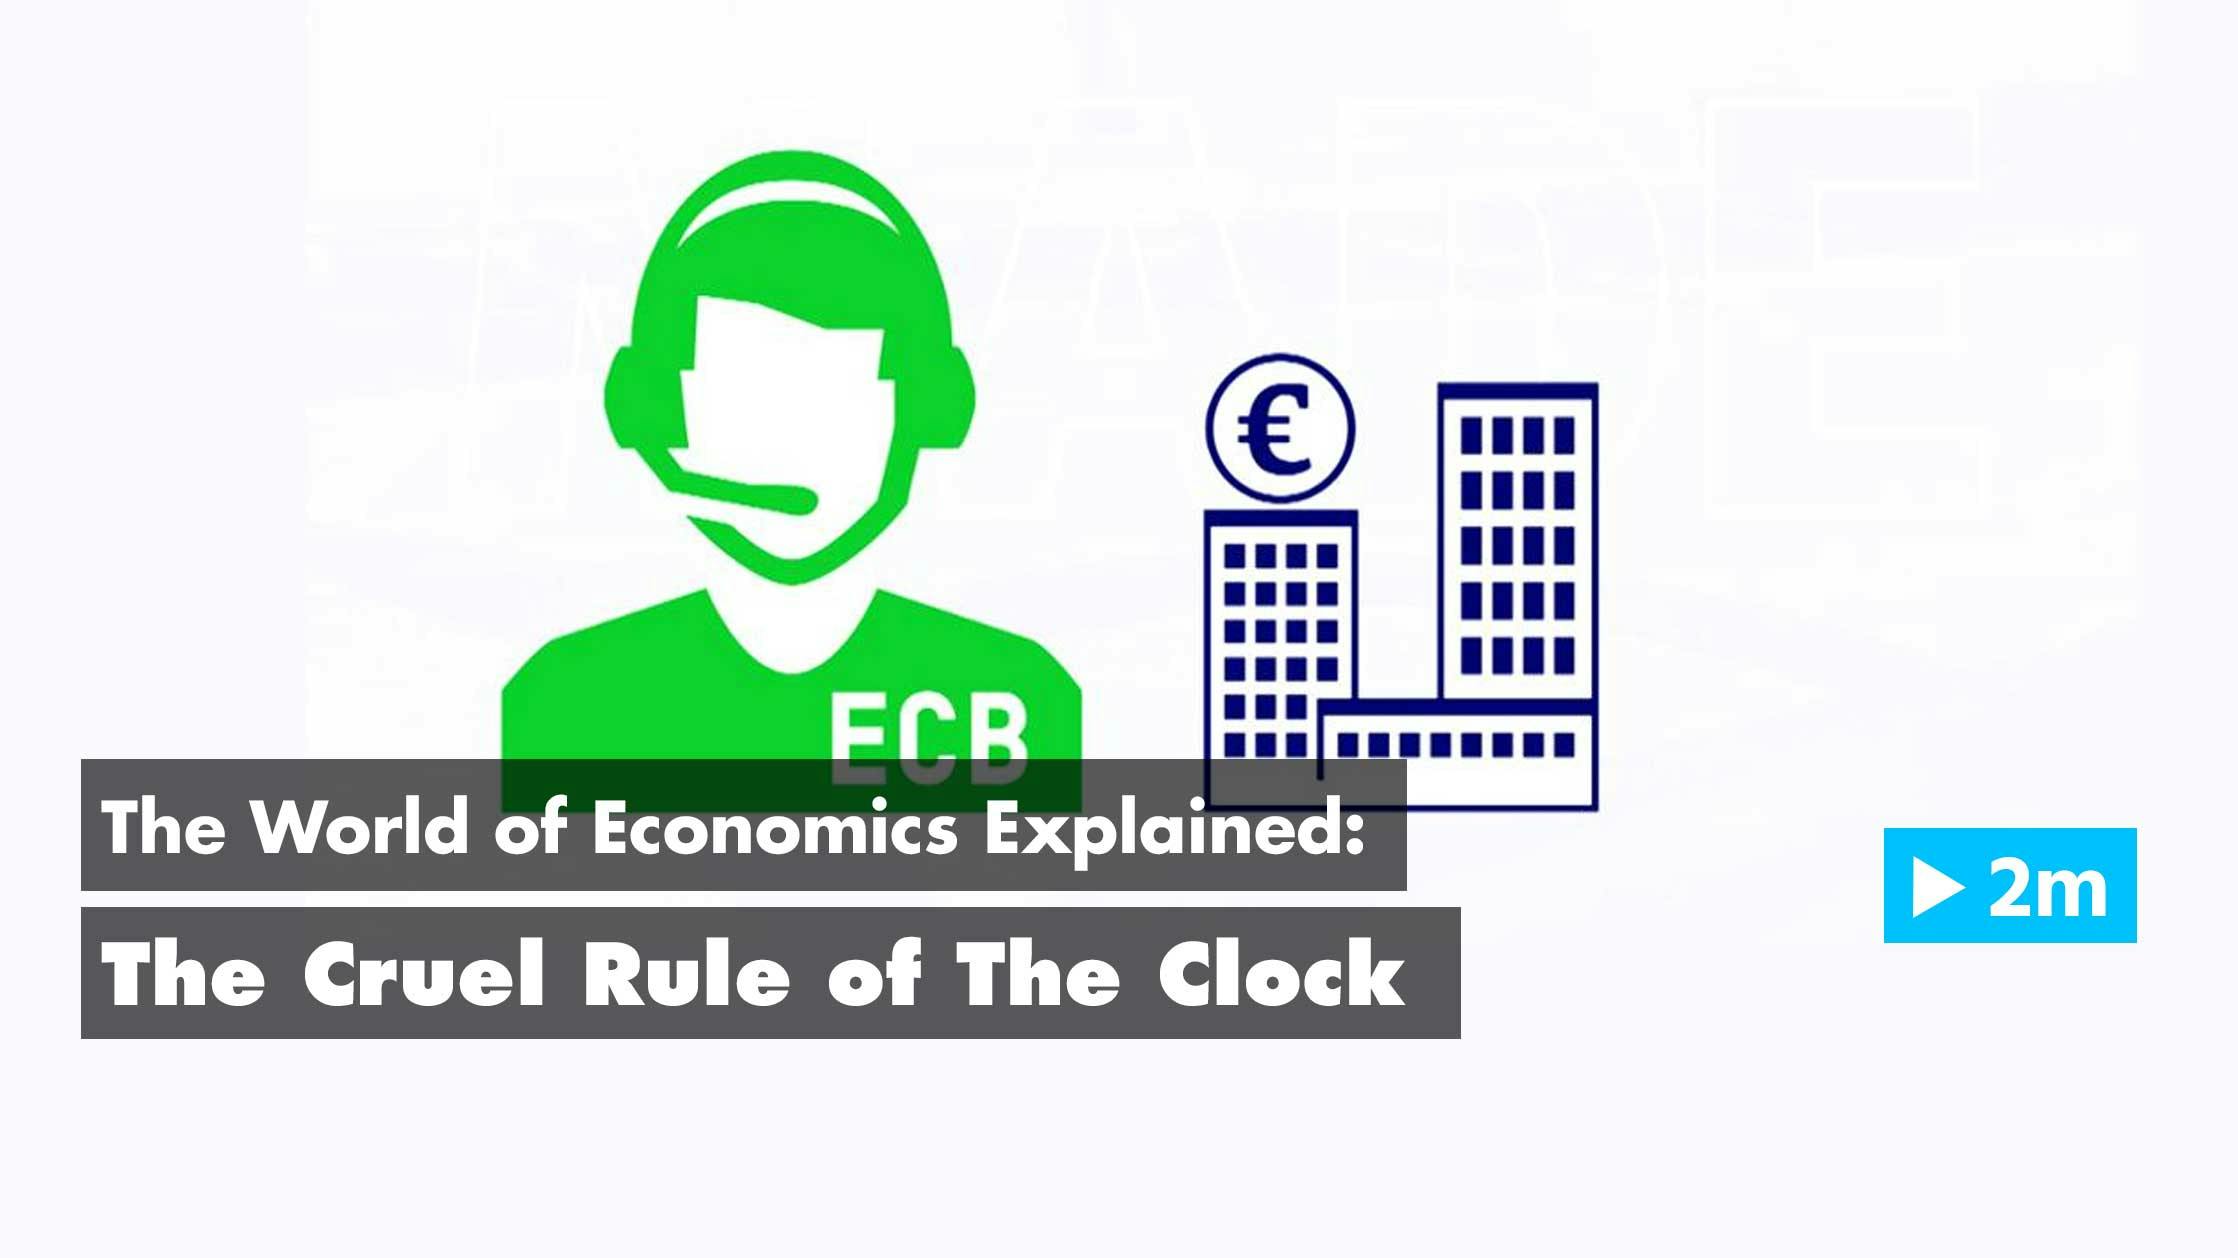 The World of Economics Explained: The cruel rule of the clock